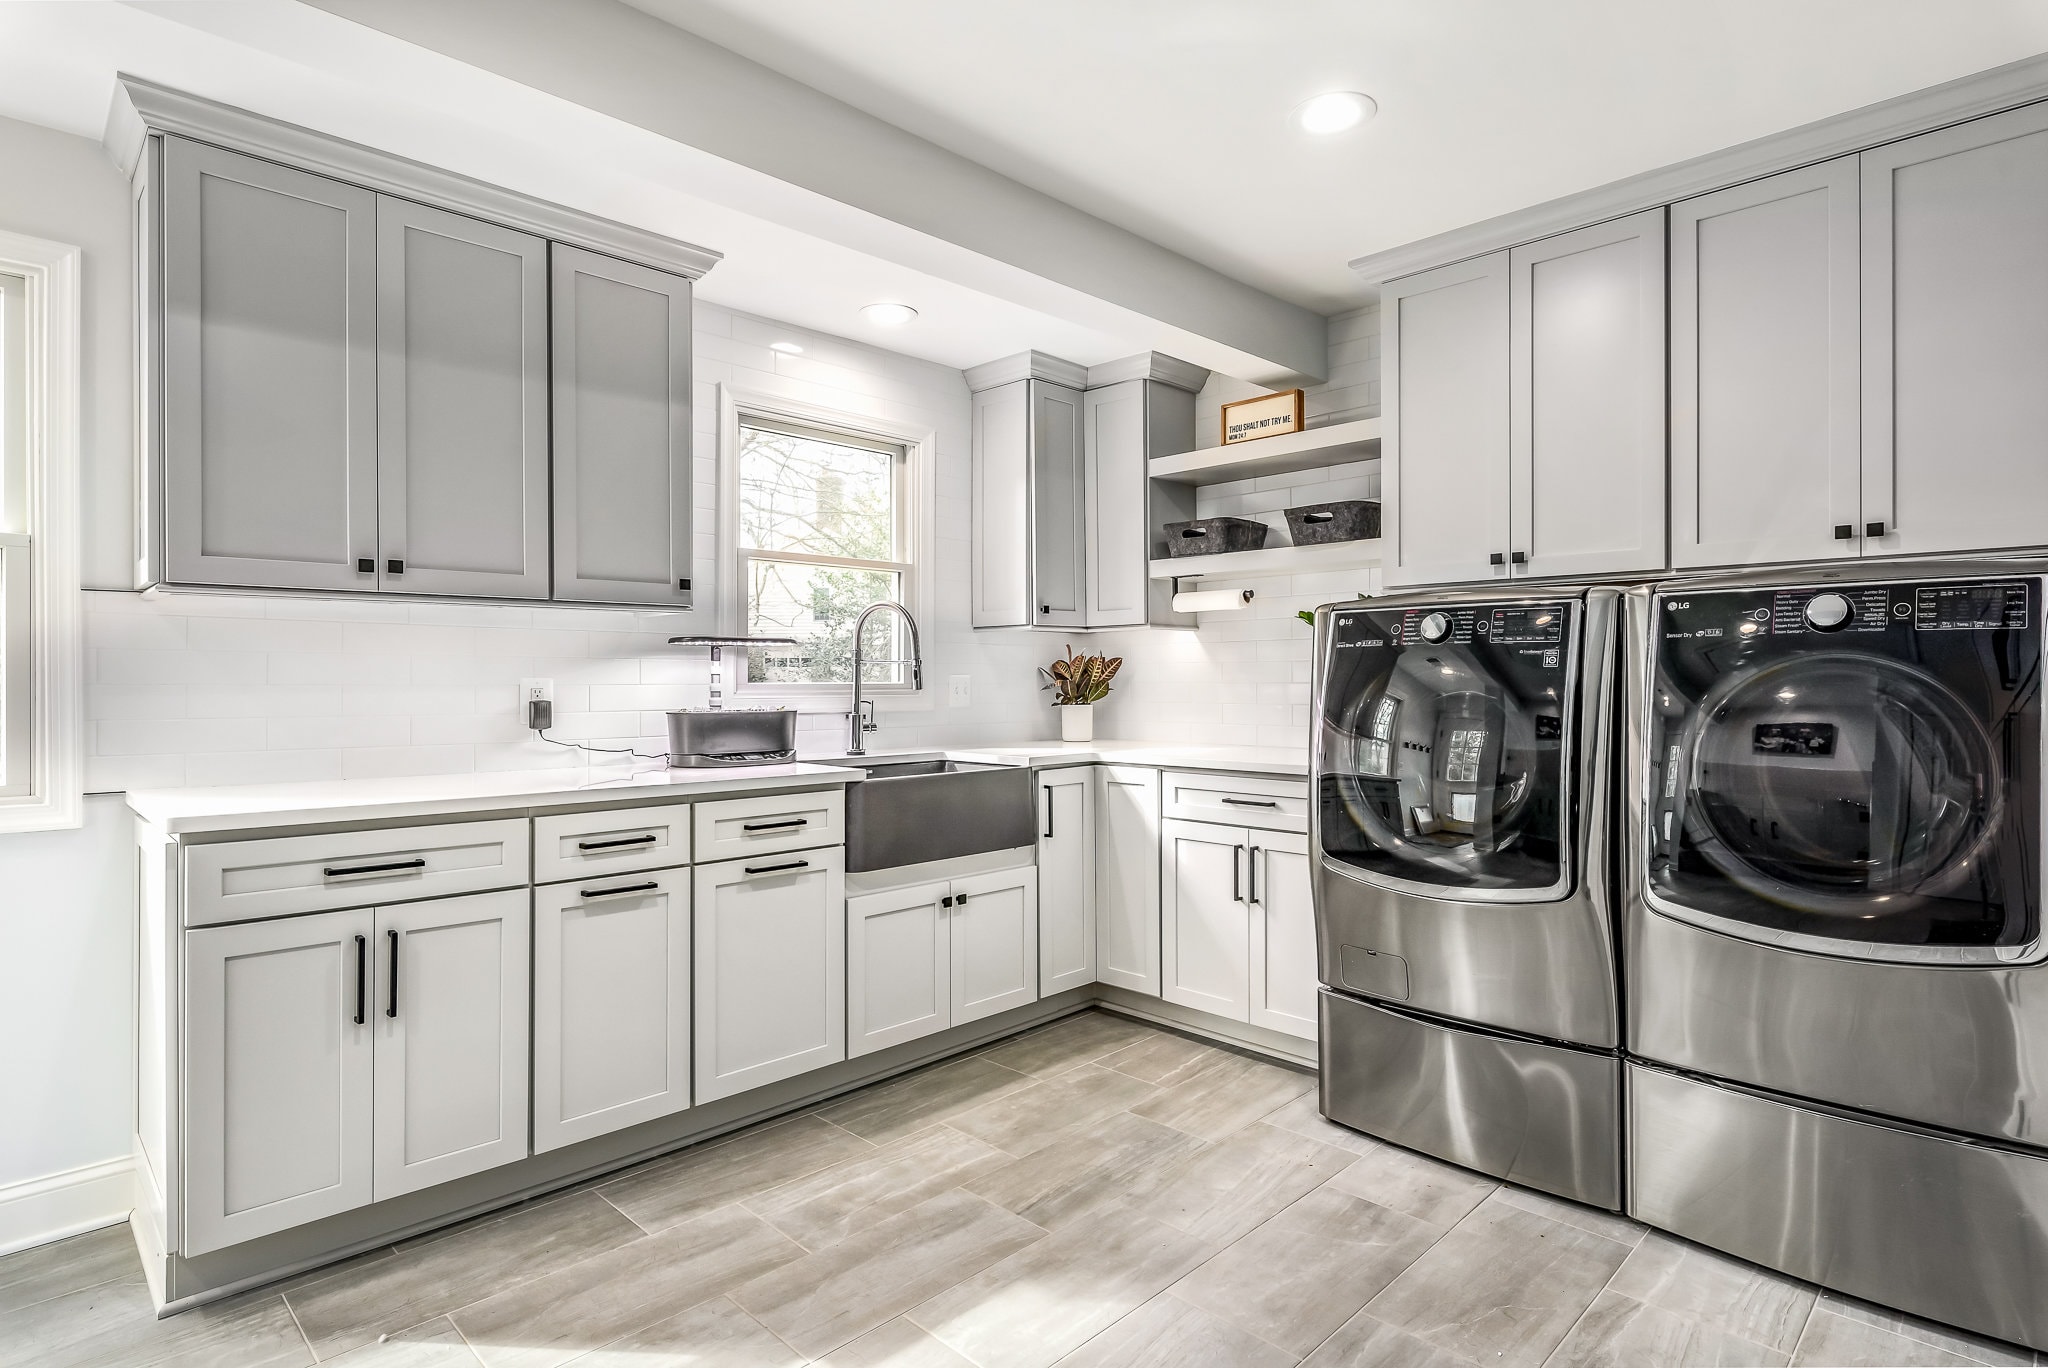 Mudrooms & Laundry Rooms Remodeling in Northern VA | Oak Hill Building